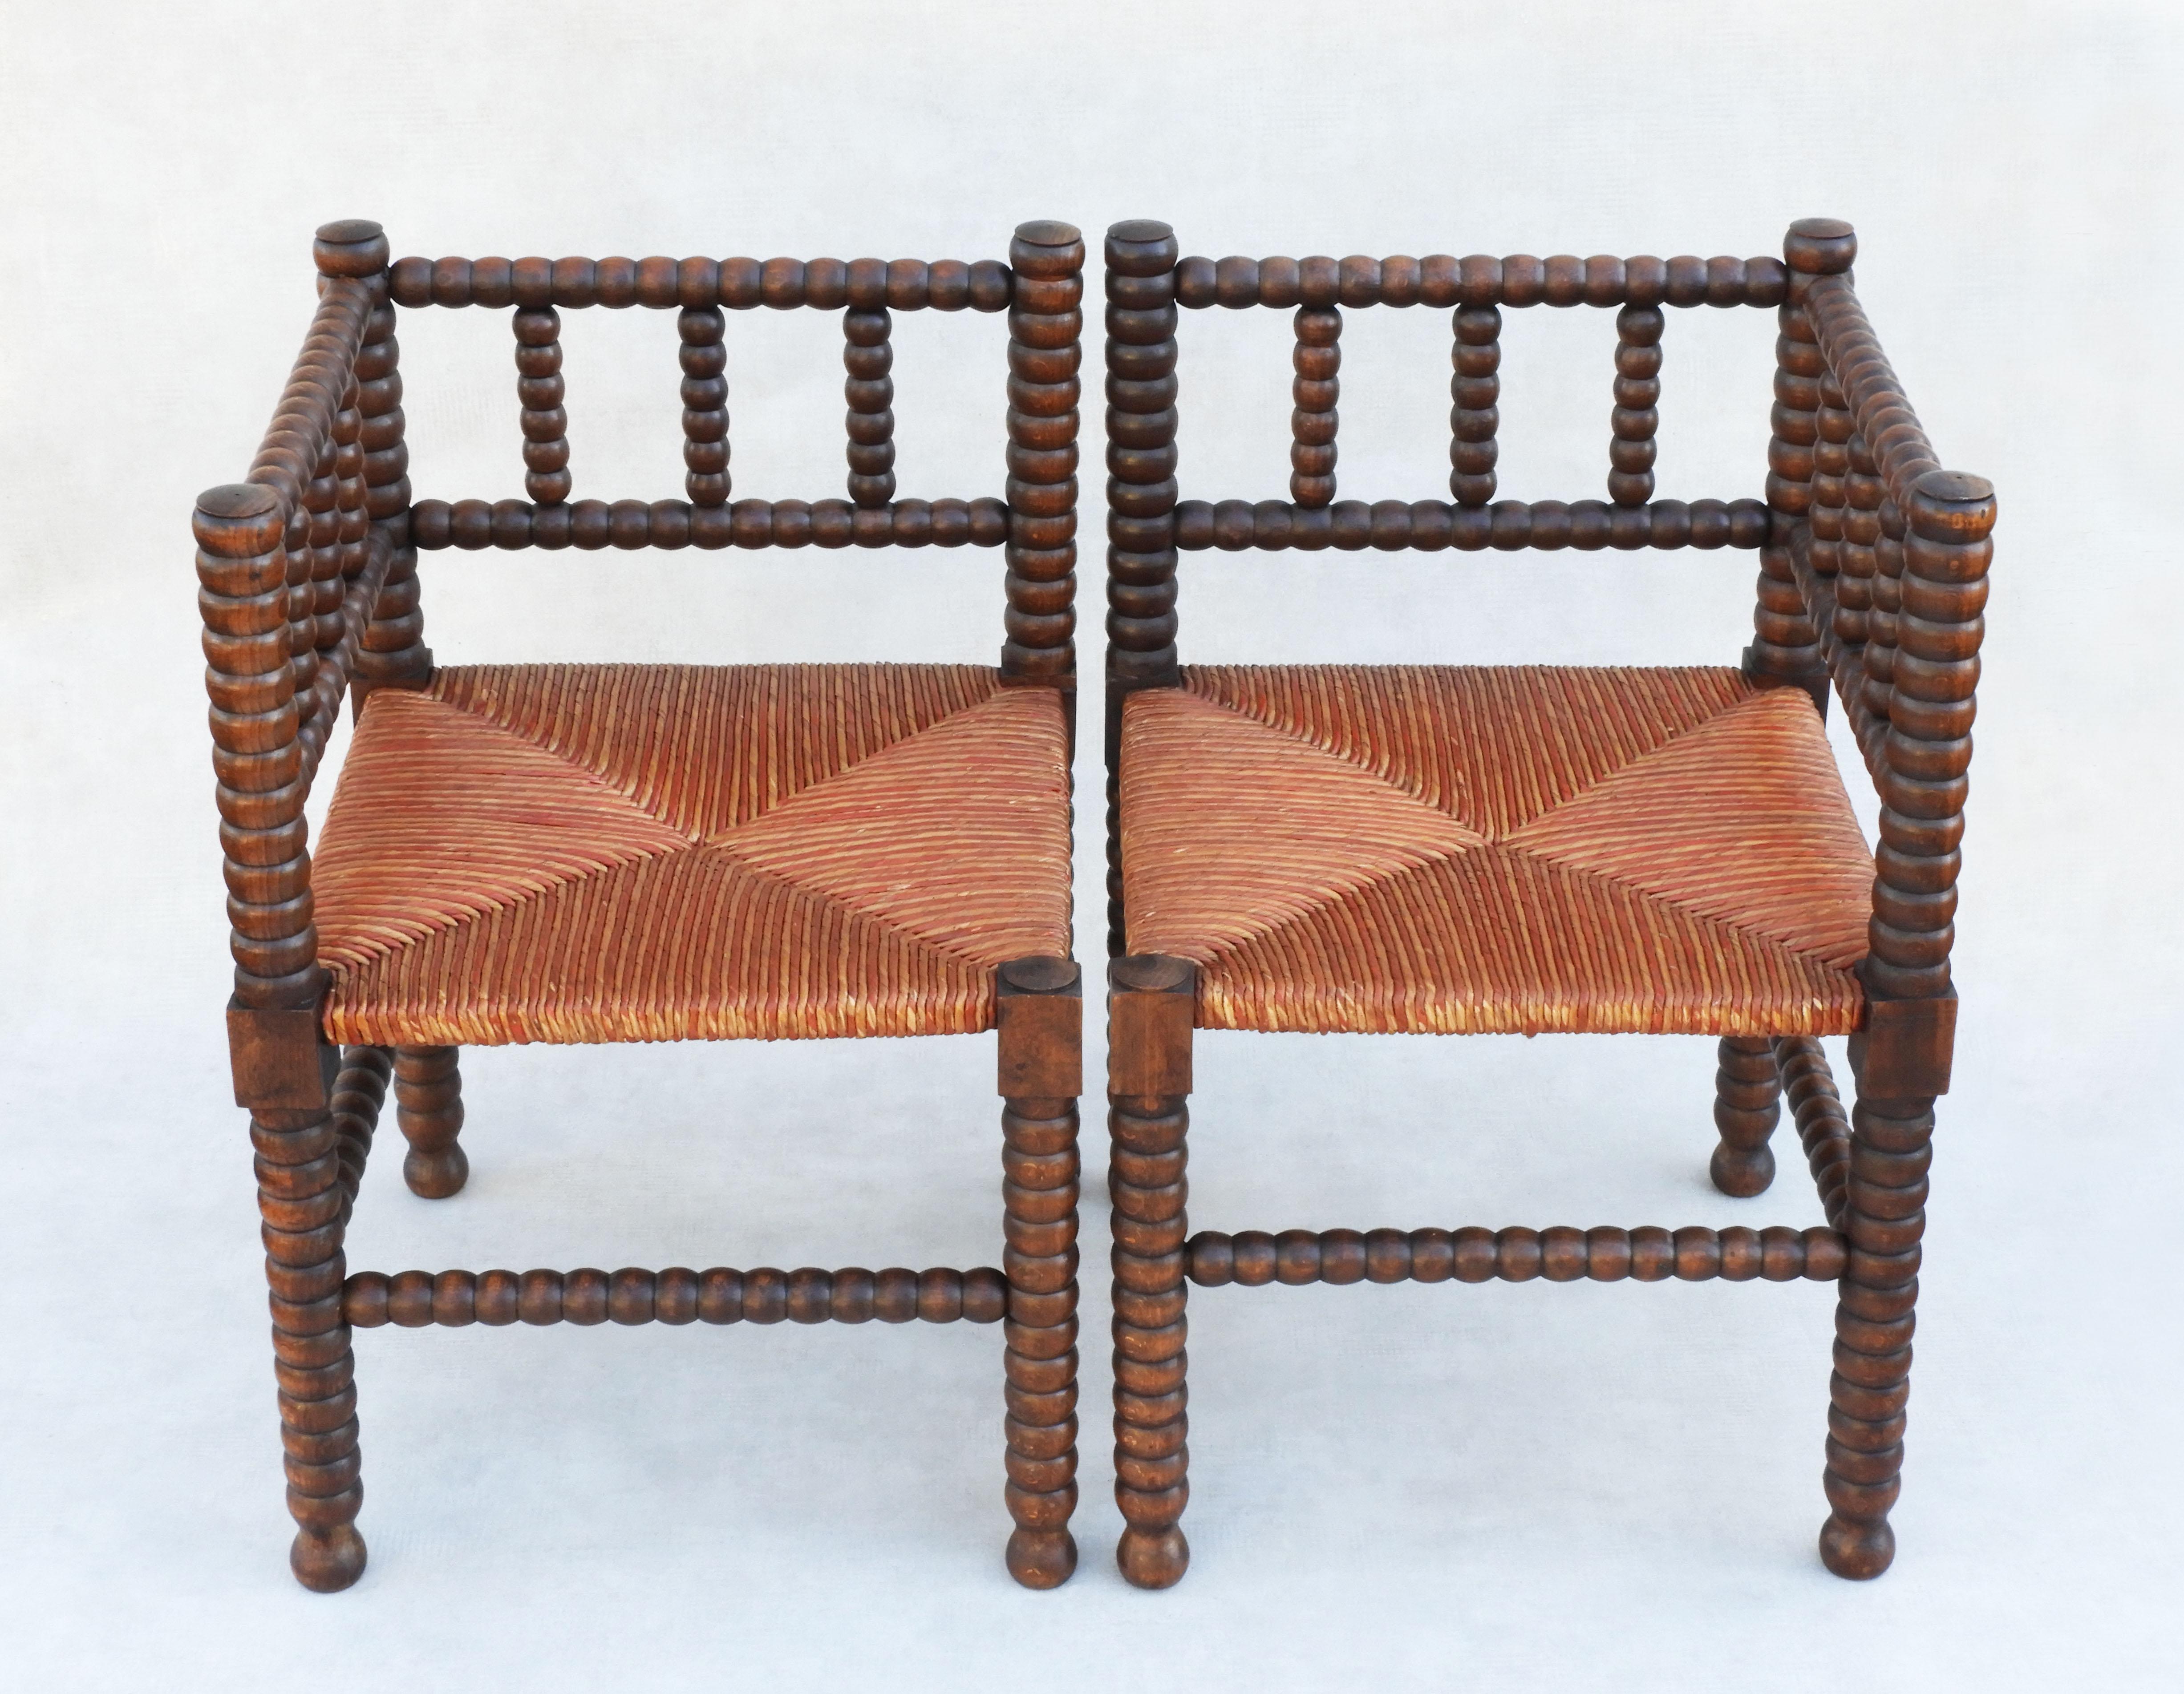 A charming pair of French Provincial bobbin wood corner chairs. Beautifully turned oak frames and original striped rush seats, sturdy and strong and in good antique condition. Stylish, eye-catching chairs would make a fabulous addition to any